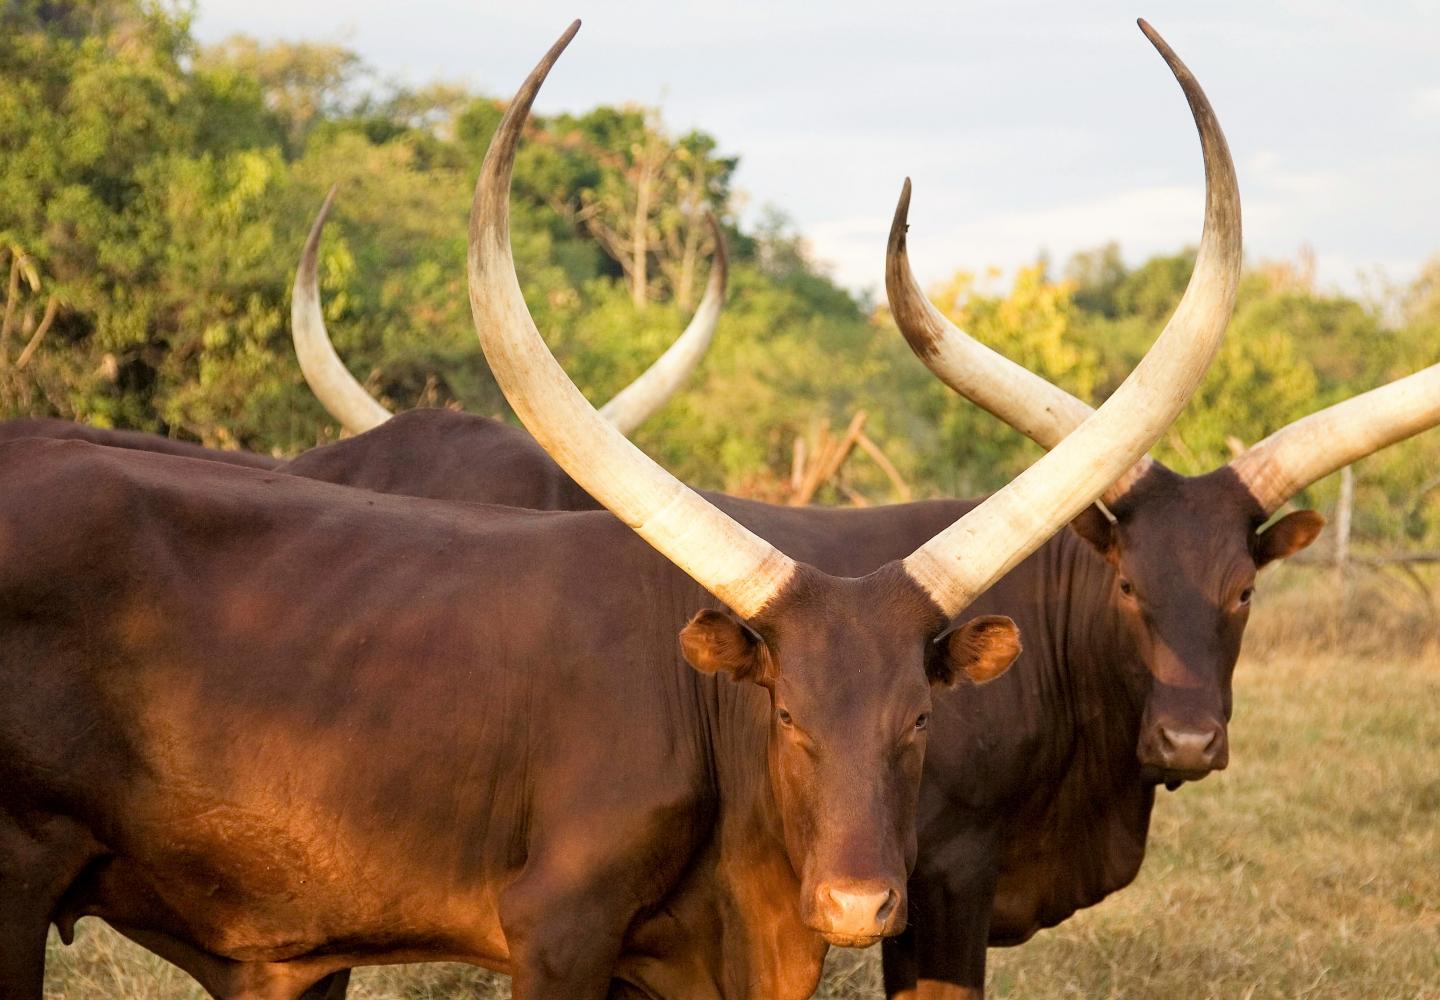 Ankole Cattle with long horns